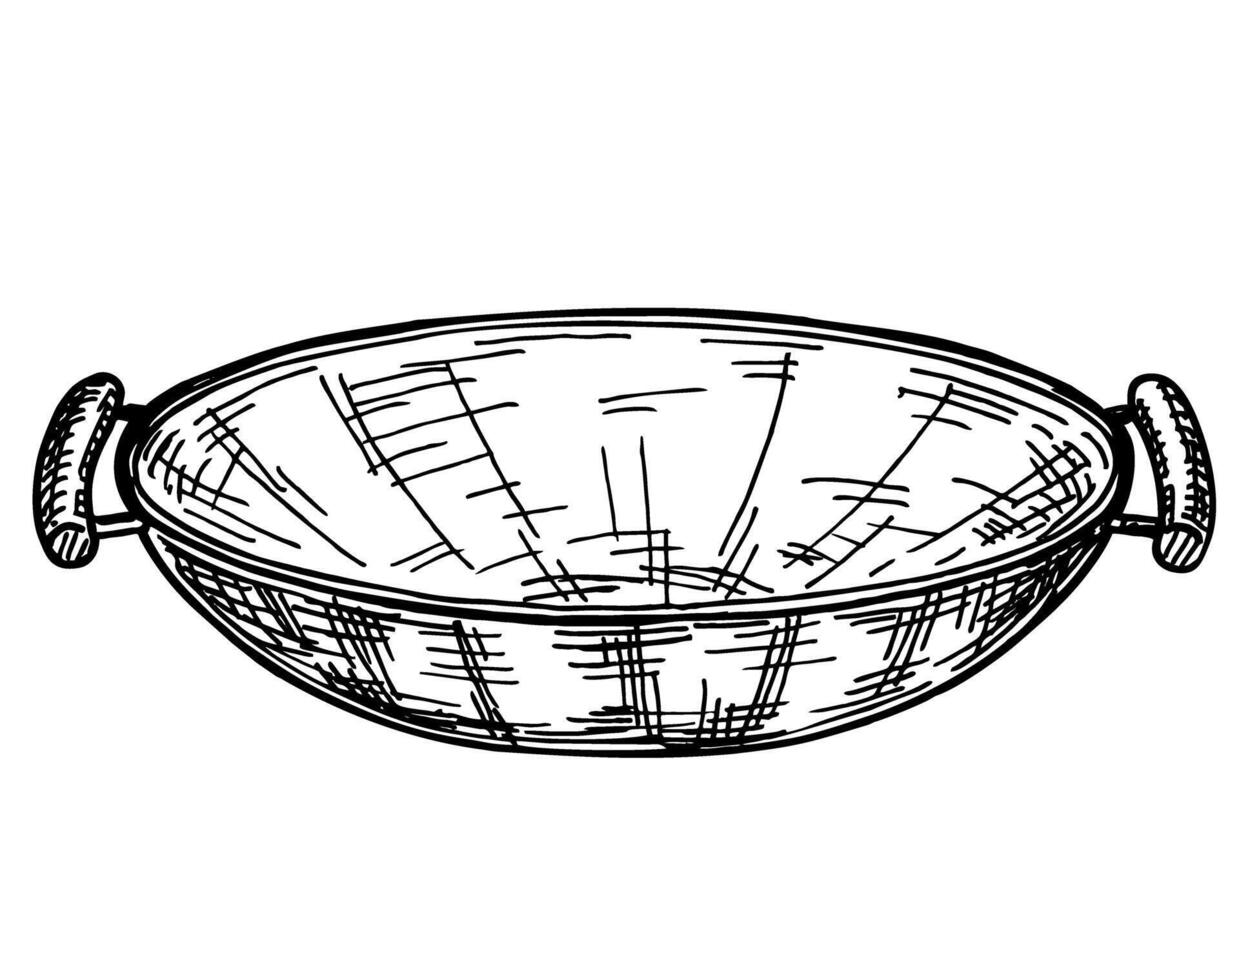 Wok pan. Professional Wok or chinese cooking pot. Hand drawn sketch. Asian fast food. For leaflets, cards, posters vector